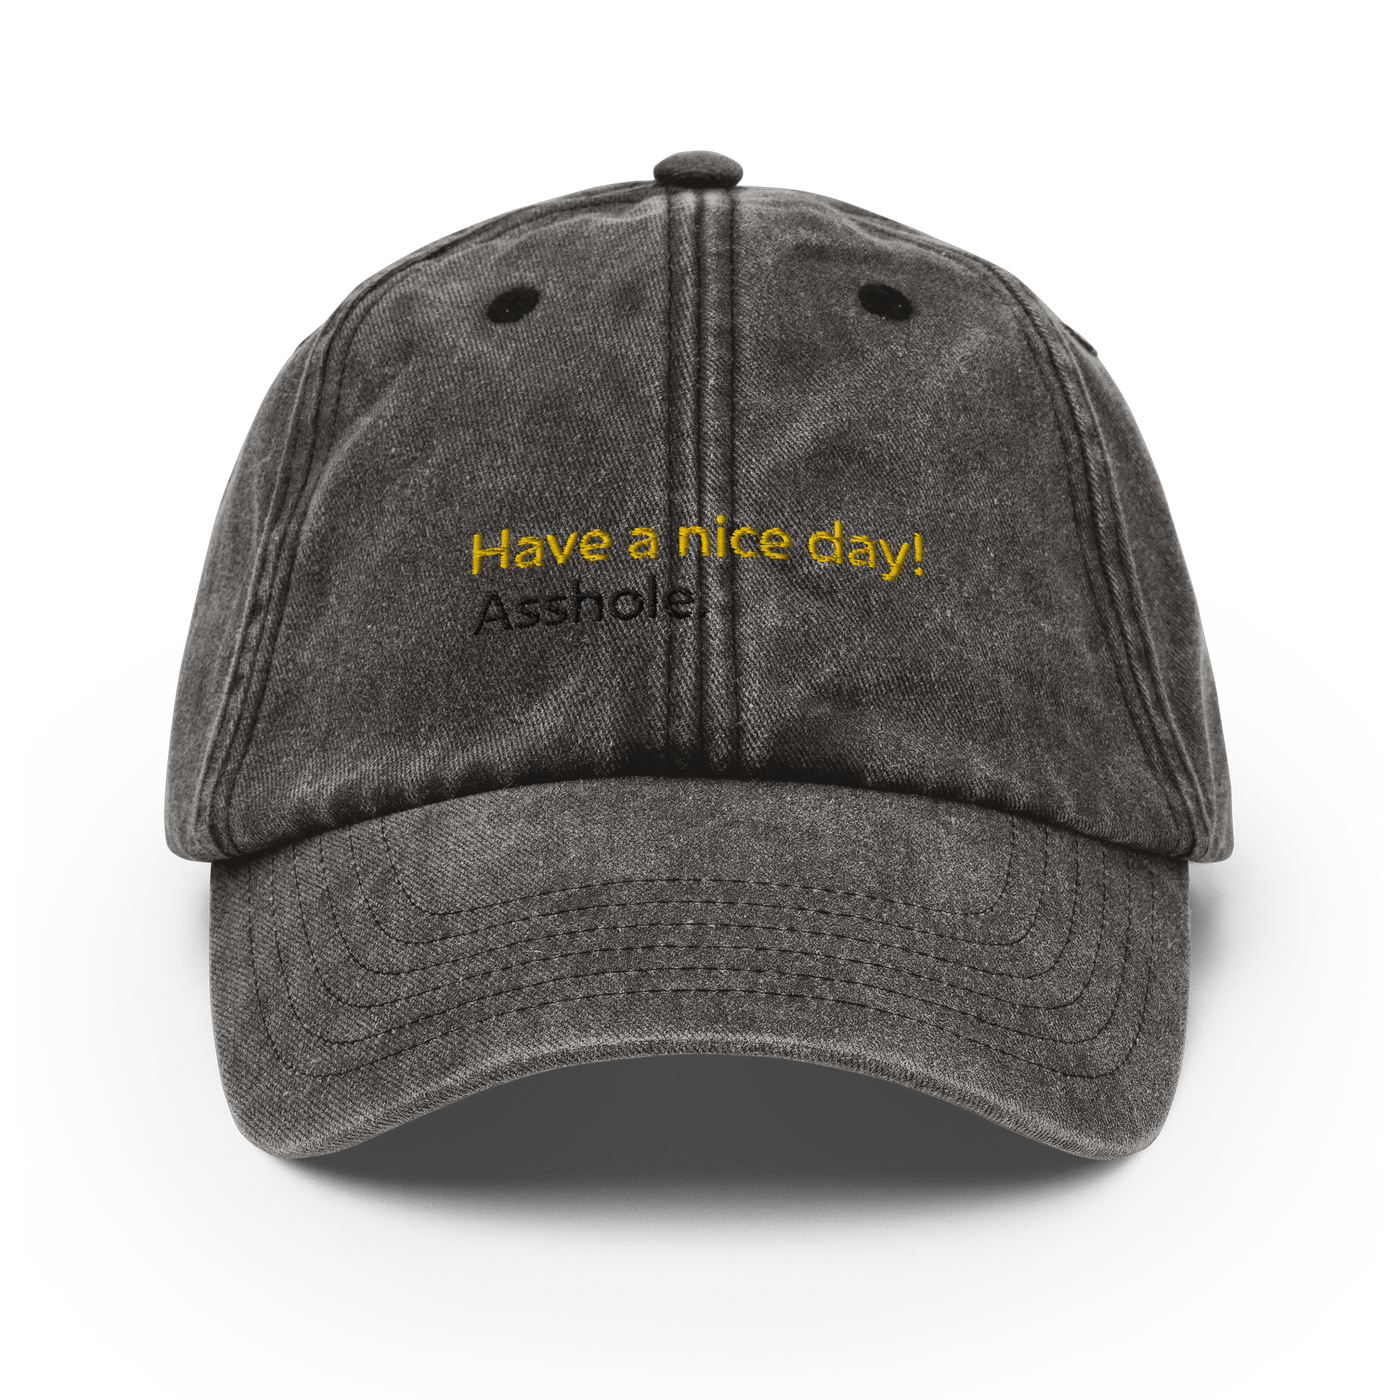 Have a nice day! (asshole) Vintage Hat - Vintage Black - - Just Another Cap Store